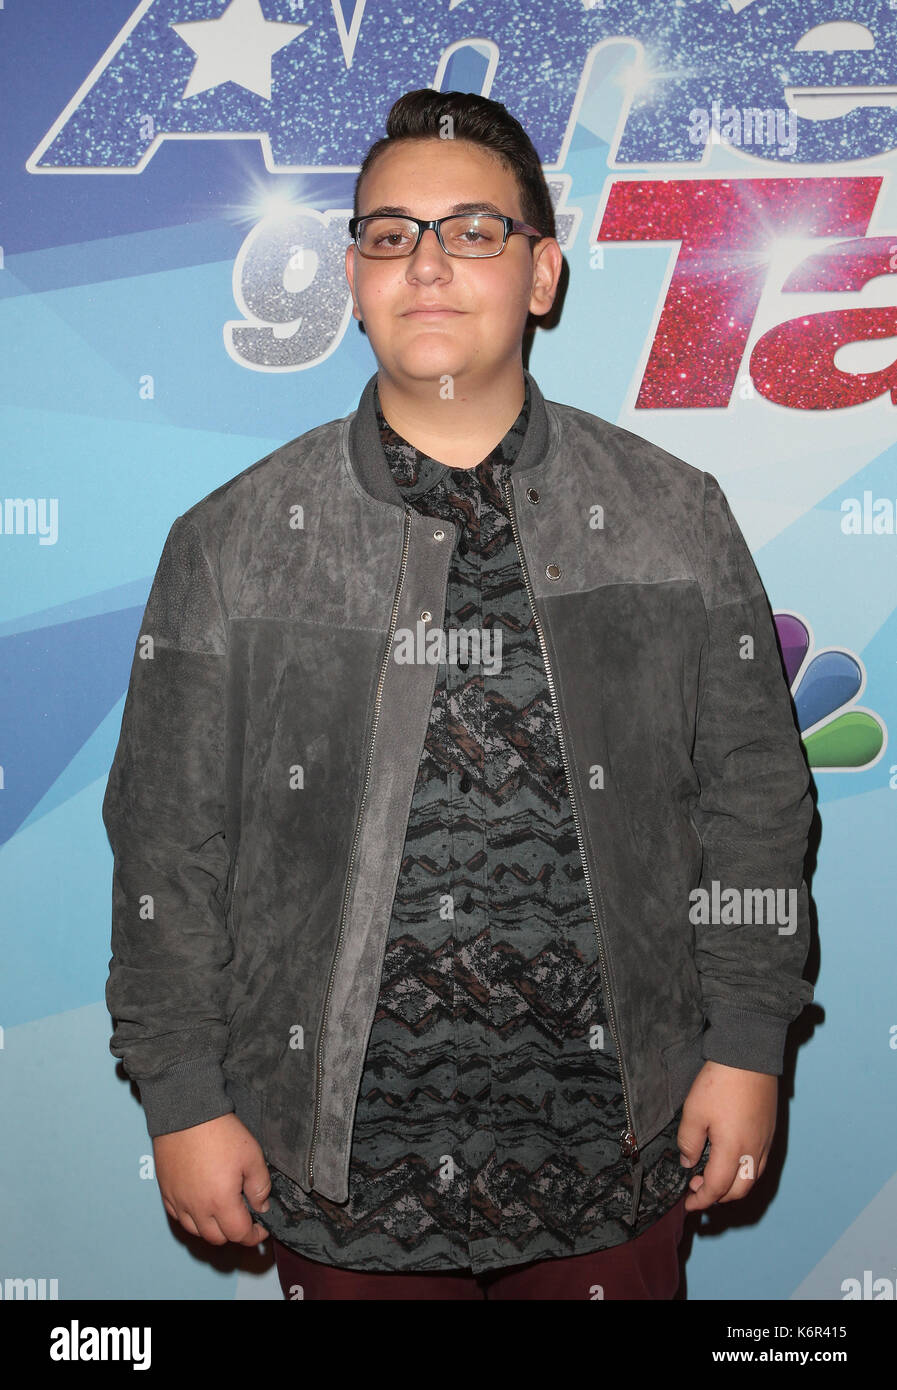 Featured image of post Christian Guardino Agt Christian guardino is a young singer songwriter from long island ny who competed on america s got talent agt season 12